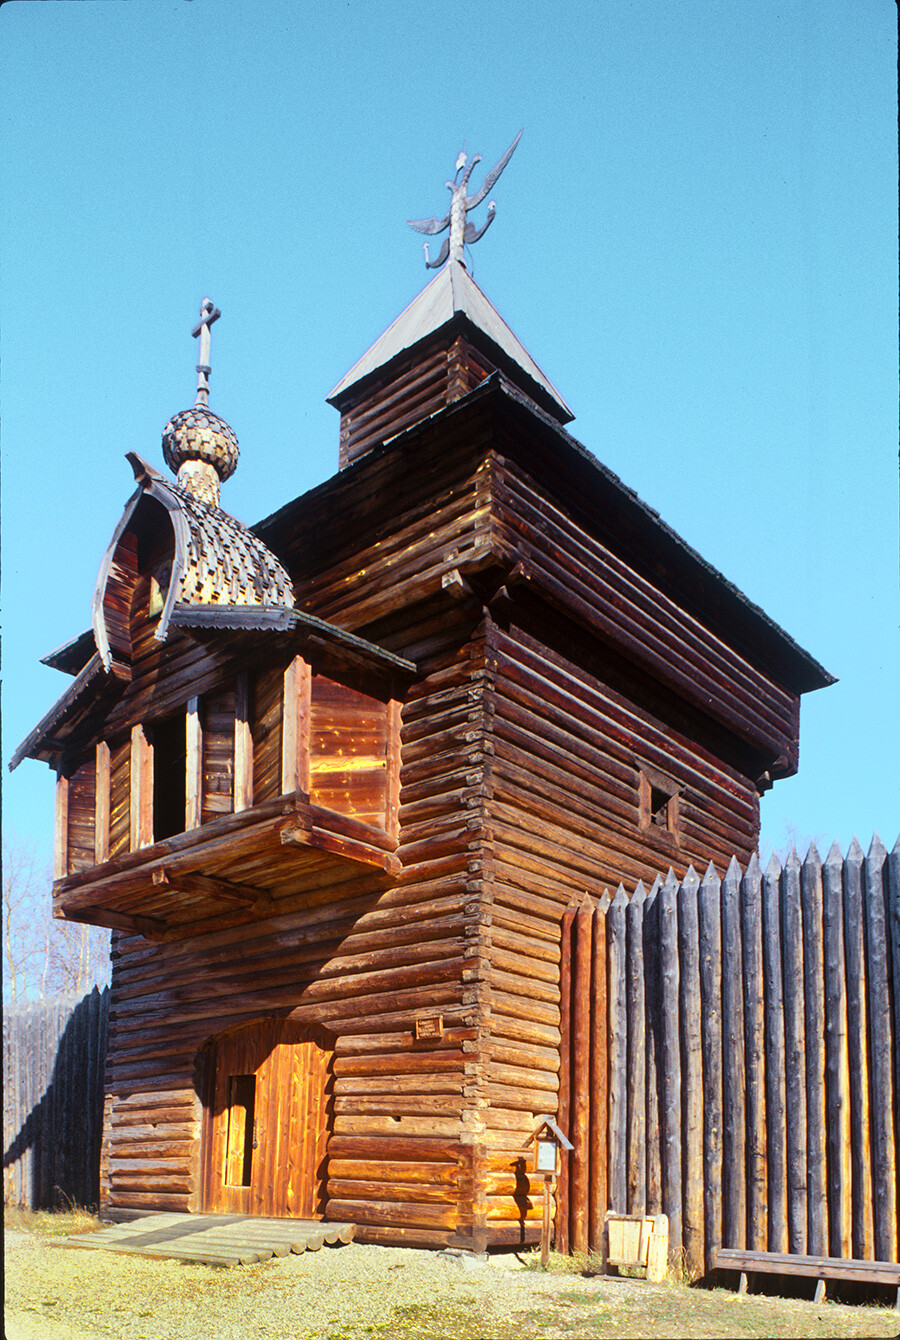 Taltsy. Savior Tower from Ilimsk Fort, southwest view. October 2, 1999